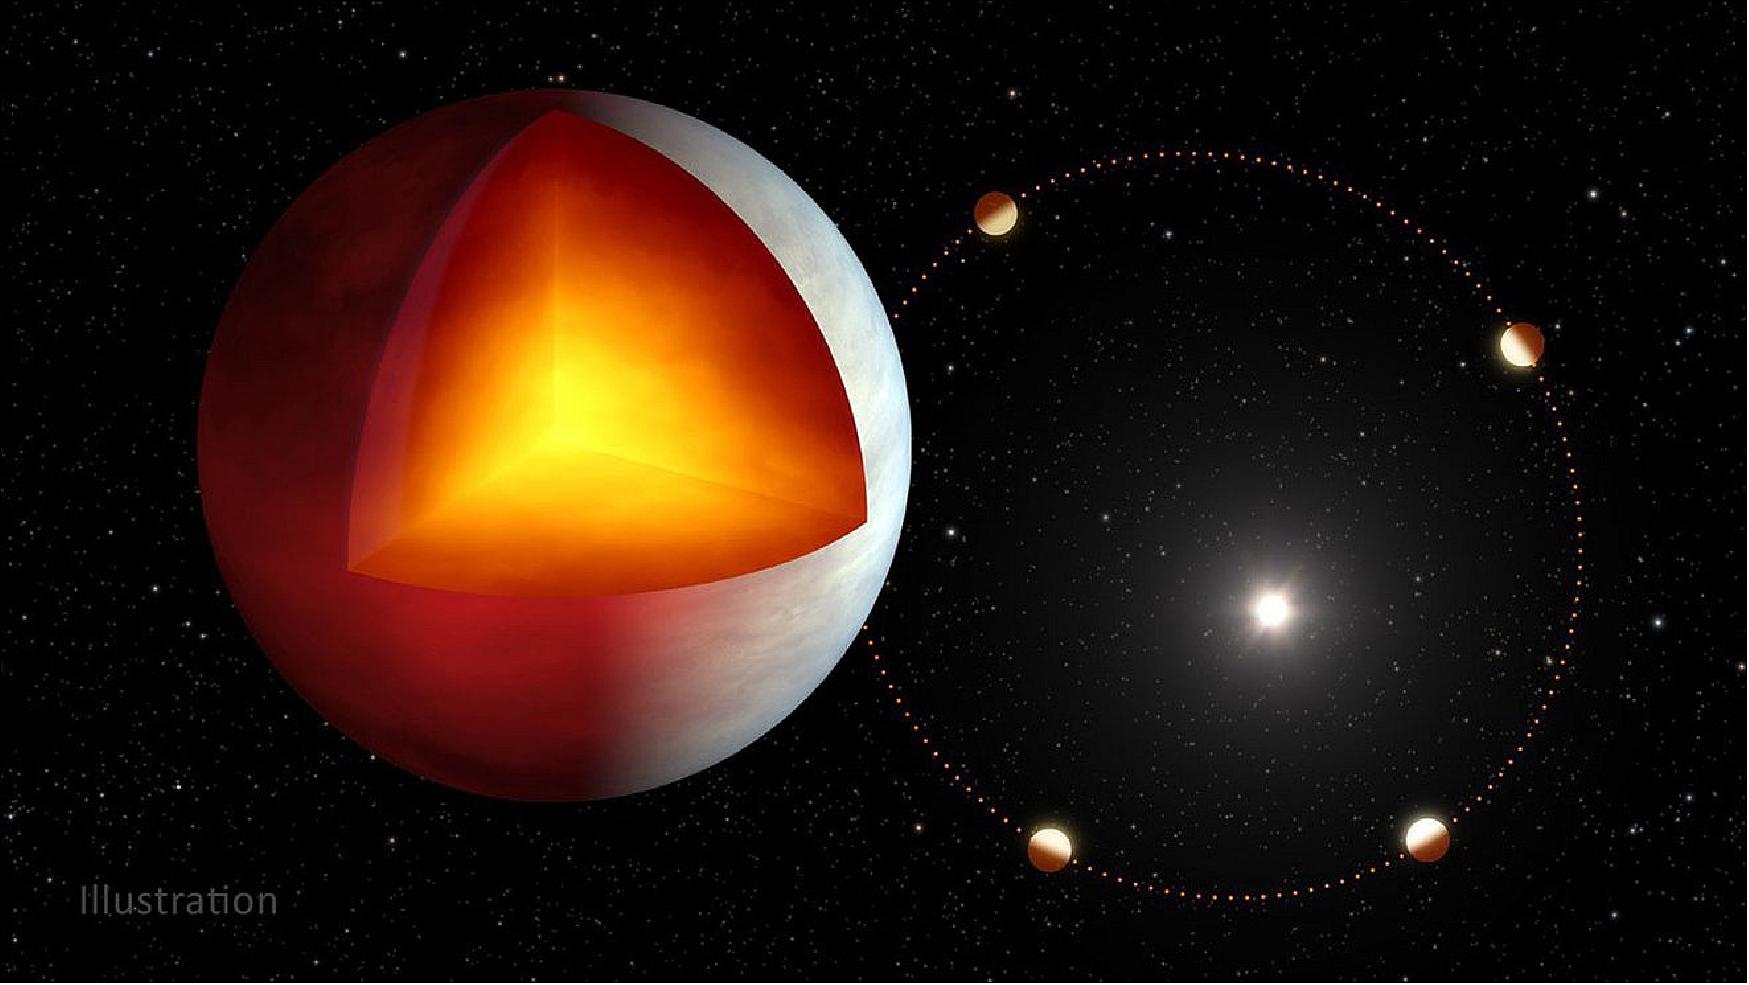 Figure 7: Planet XO-3b has an internal source of heat, possibly from tidal heating, which is caused by the squeezing of the planet’s interior by the gravity of its parent star. This could be increased by the planet’s slightly elliptical orbit (shown on the right), meaning it’s more oval-shaped than circular (image credit: NASA/JPL-Caltech)